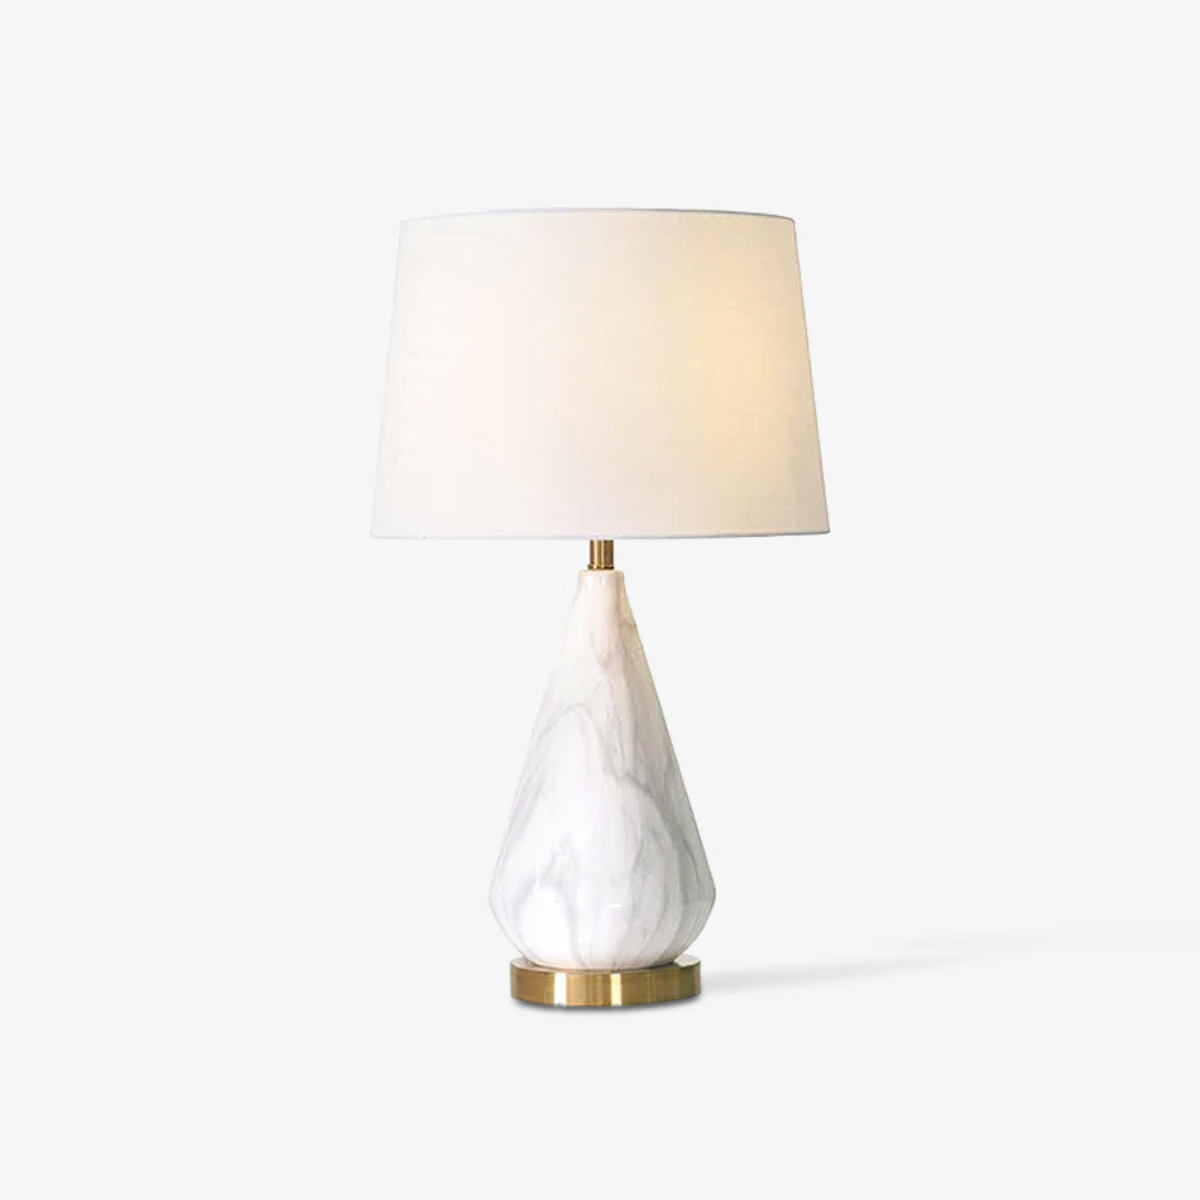 Sterling-Diamond-Shaped-Marble-Based-Table-Lamp-1